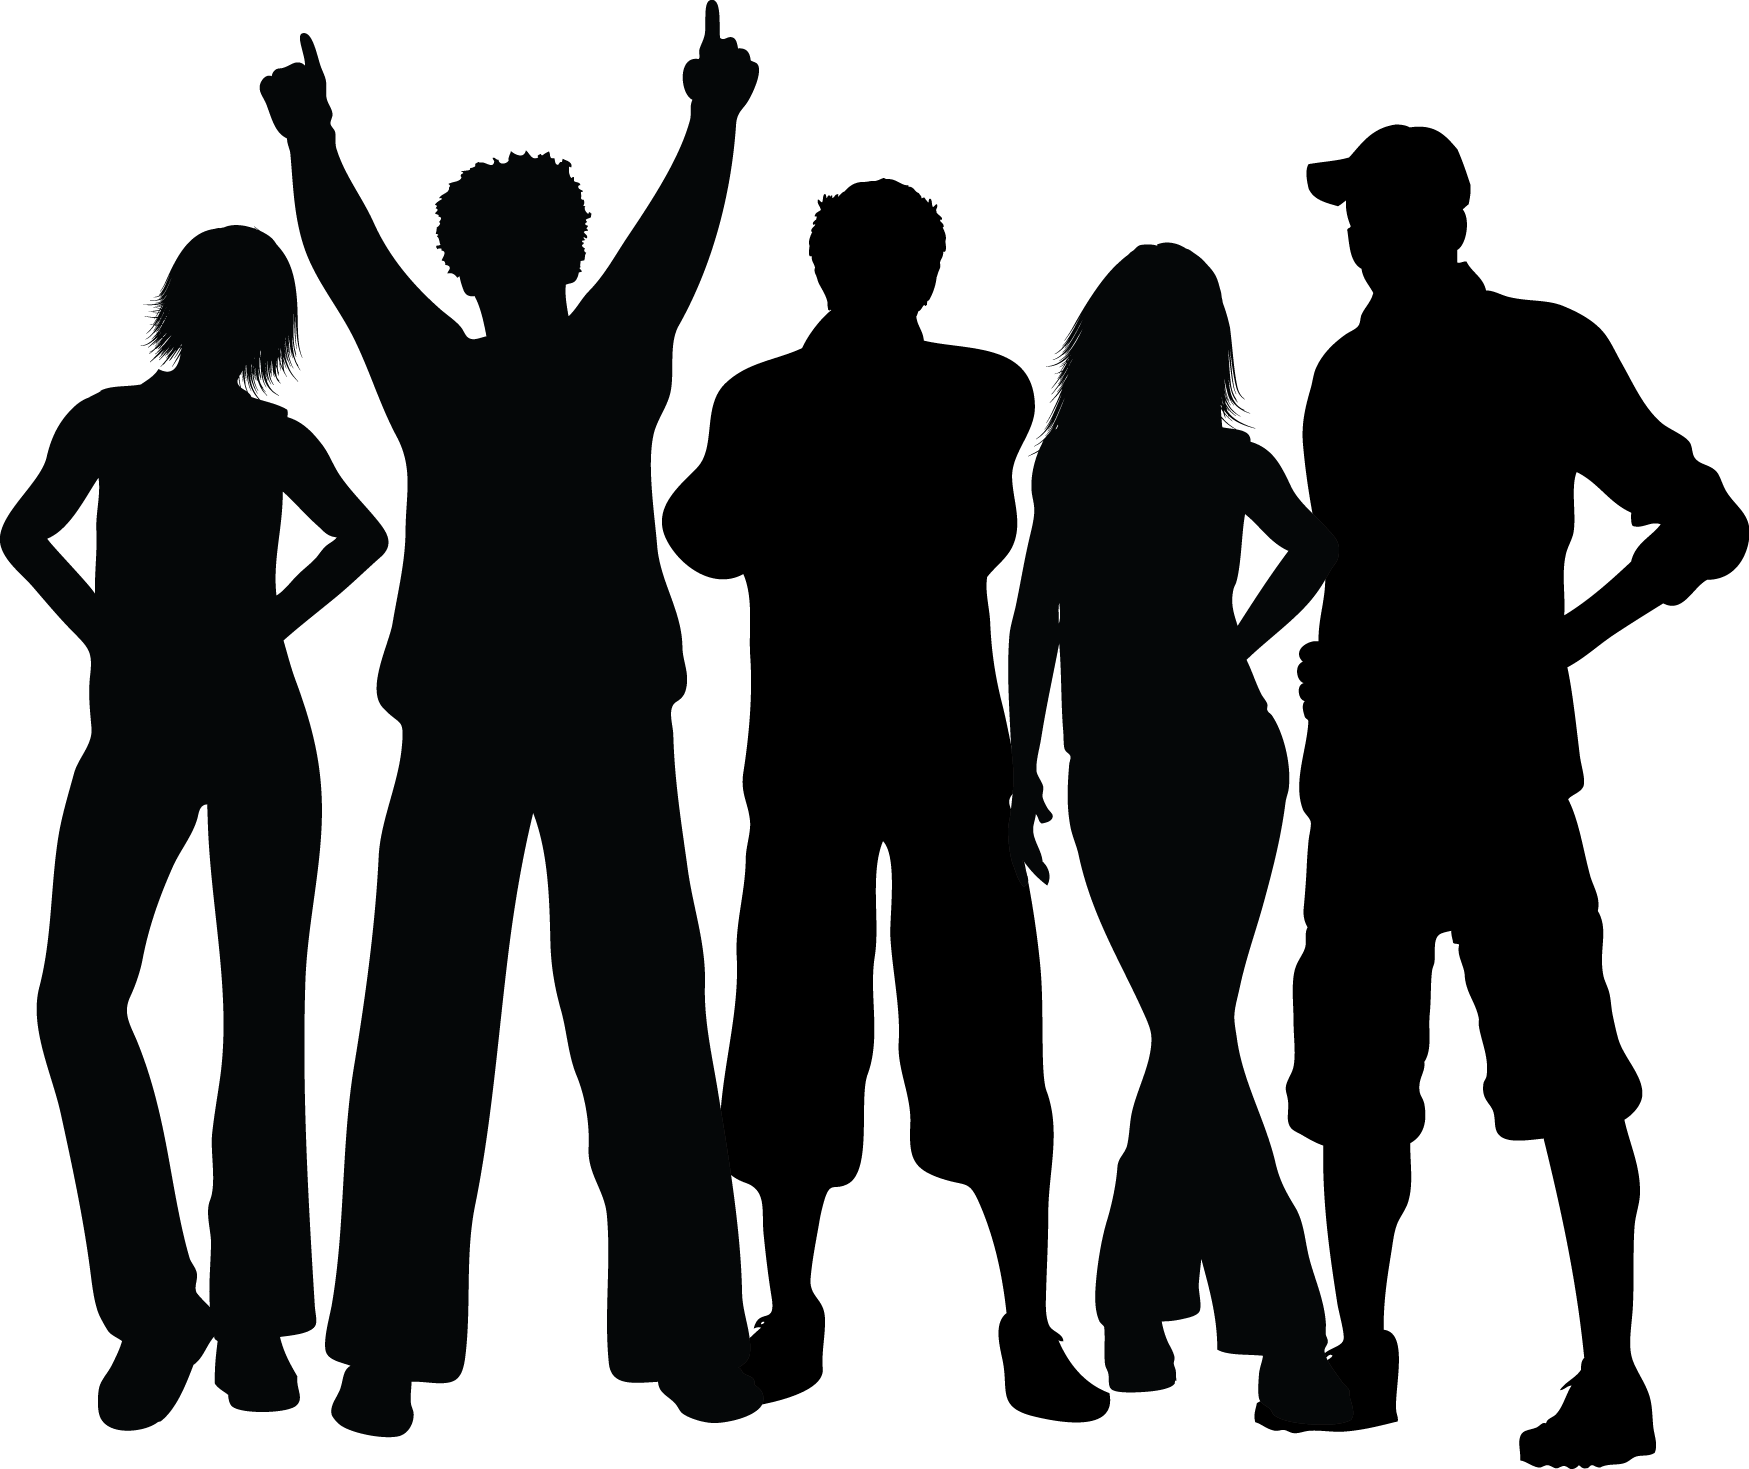 Group Black Silhouette - Dancing People Silhouette Png - Free ...